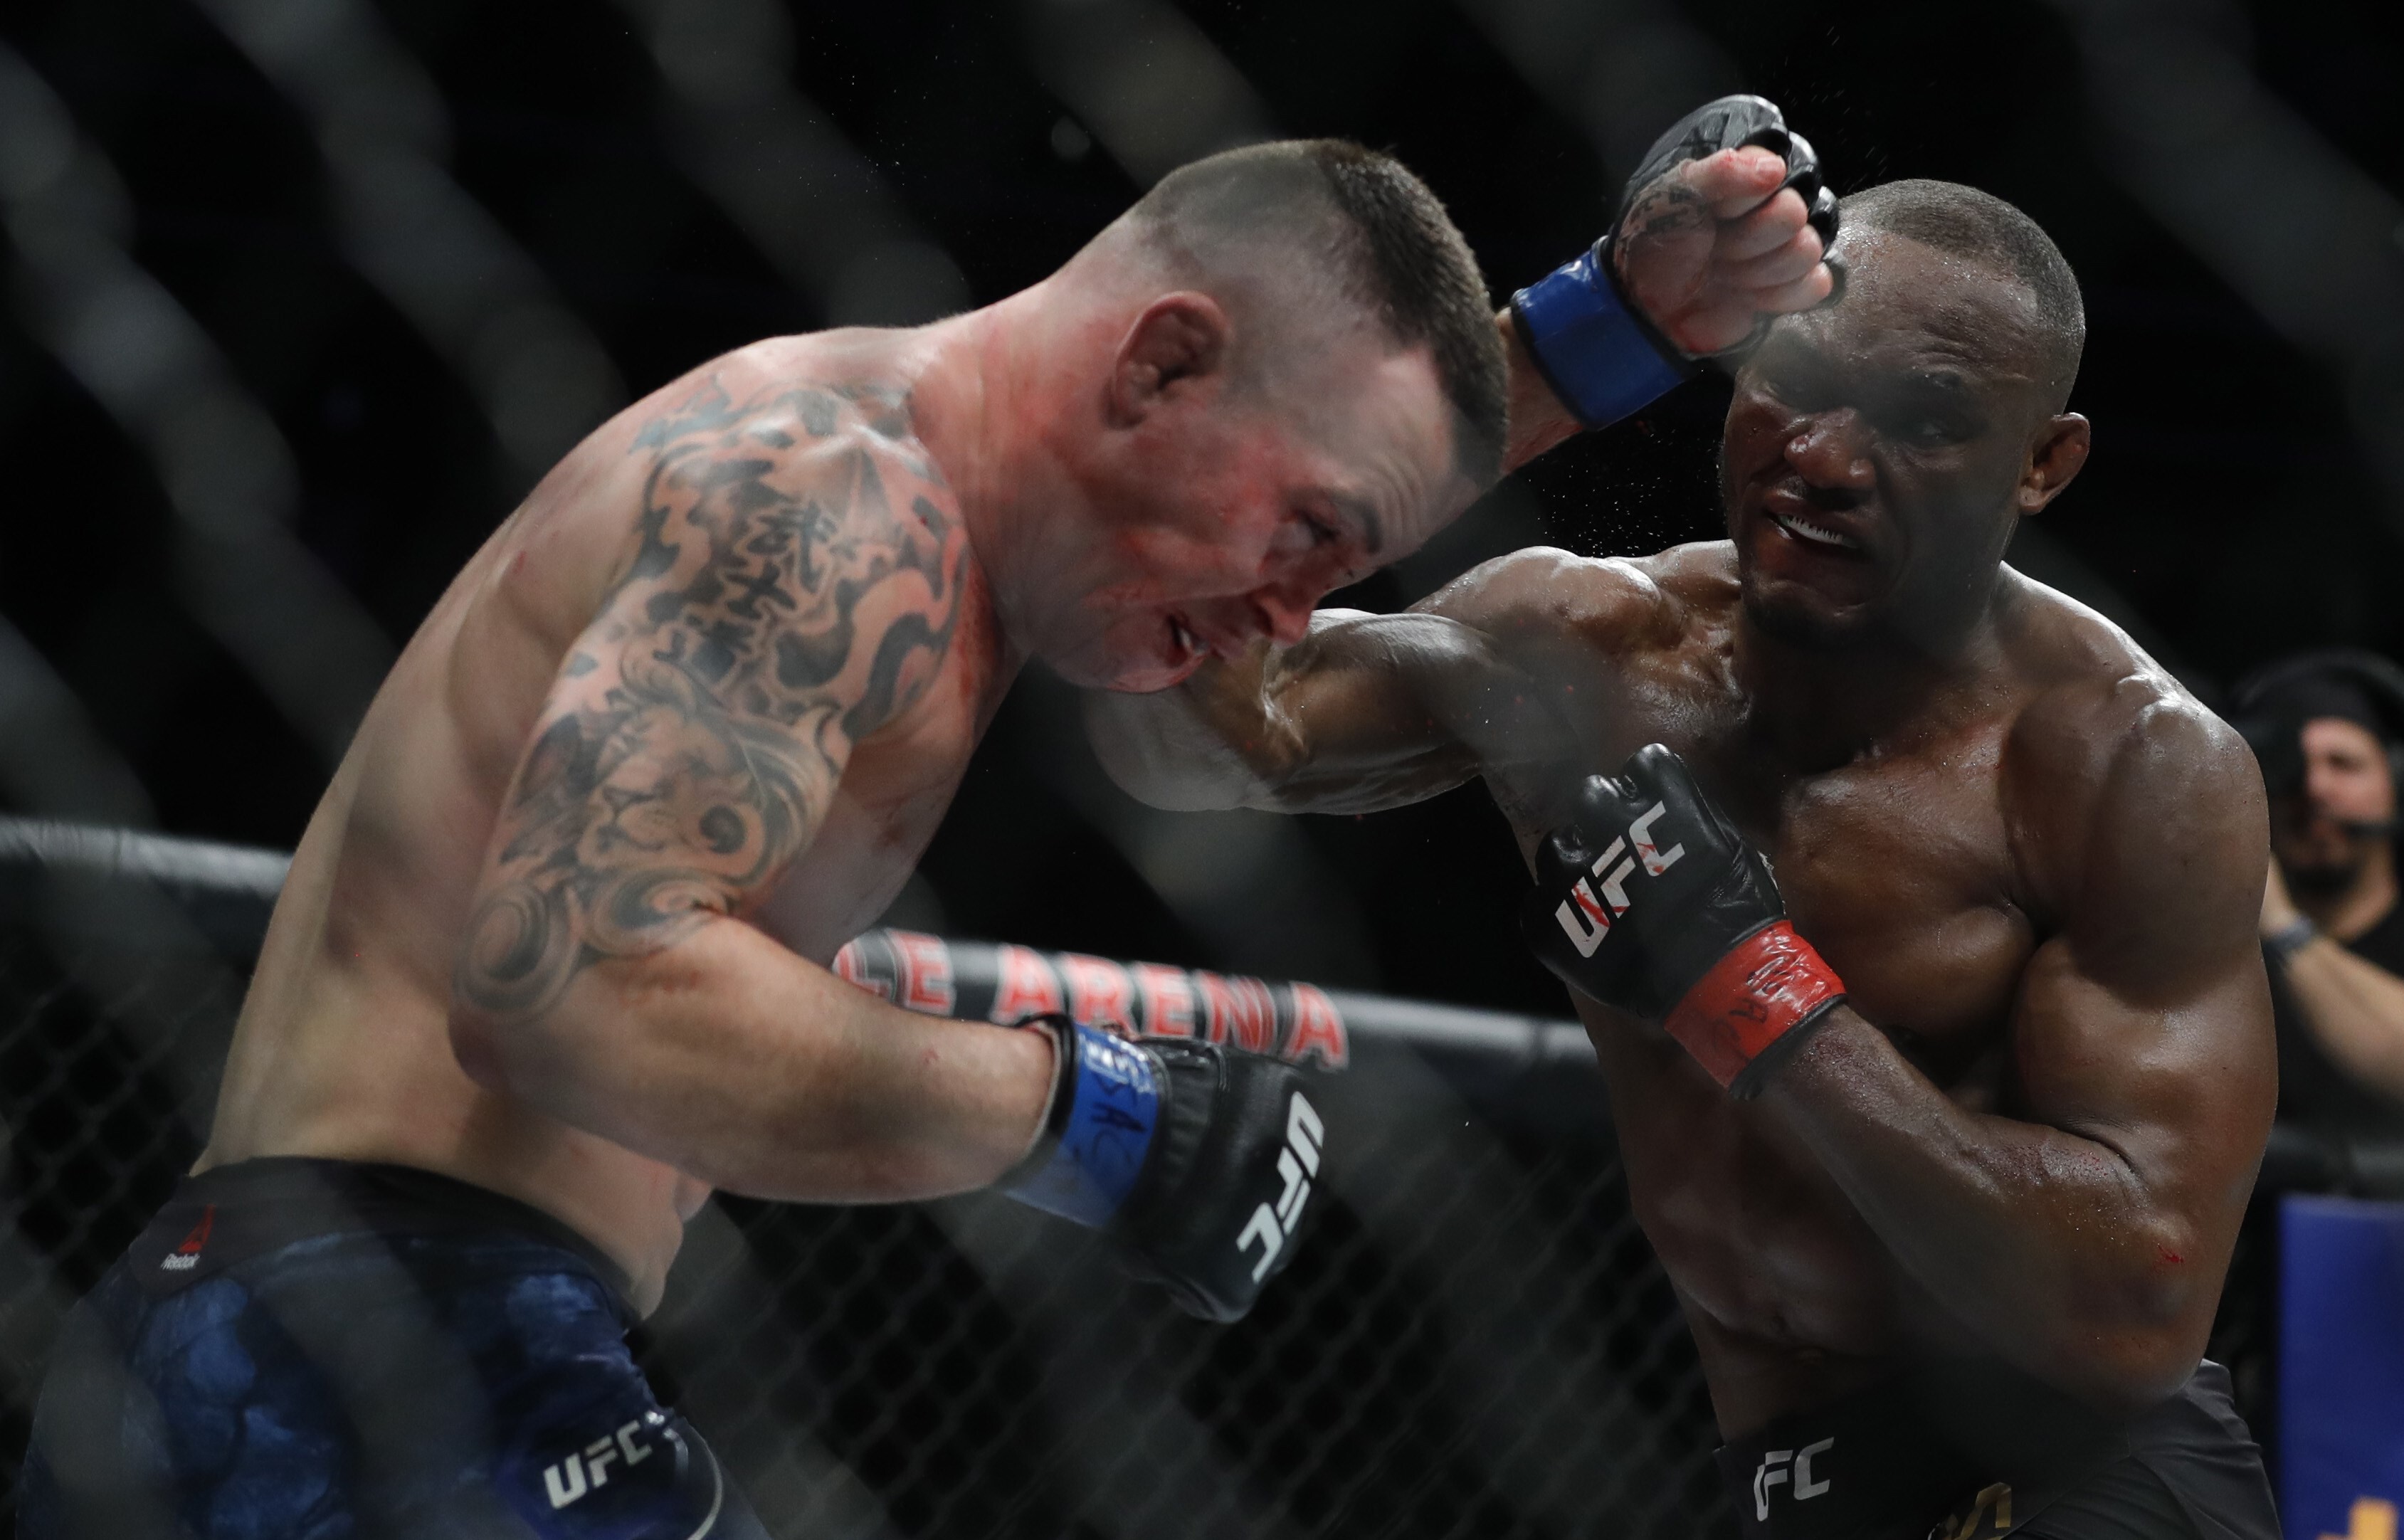 Colby Covington gets hit with a punch from welterweight champion Kamaru Usman in the fifth round of their welterweight title fight during UFC 245. Photo: AFP